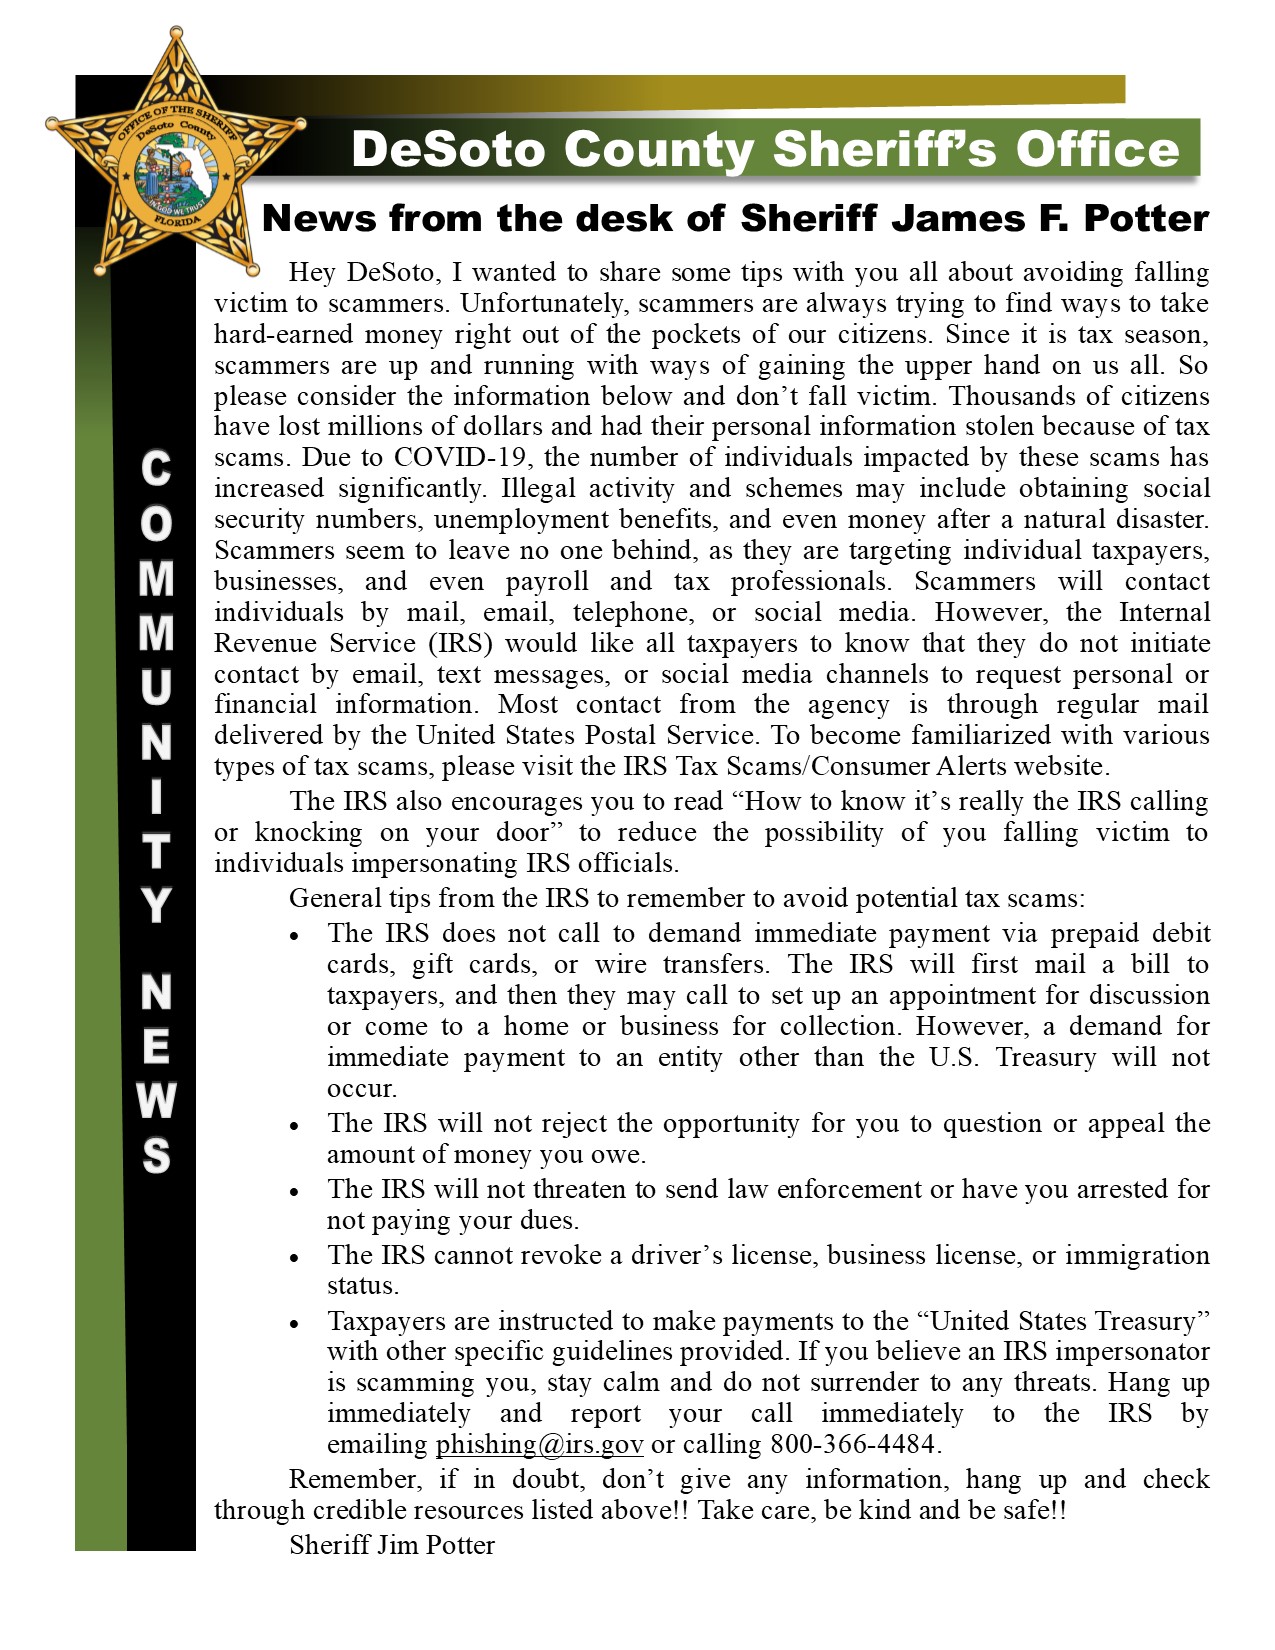 News from the desk of Sheriff James F. Potter